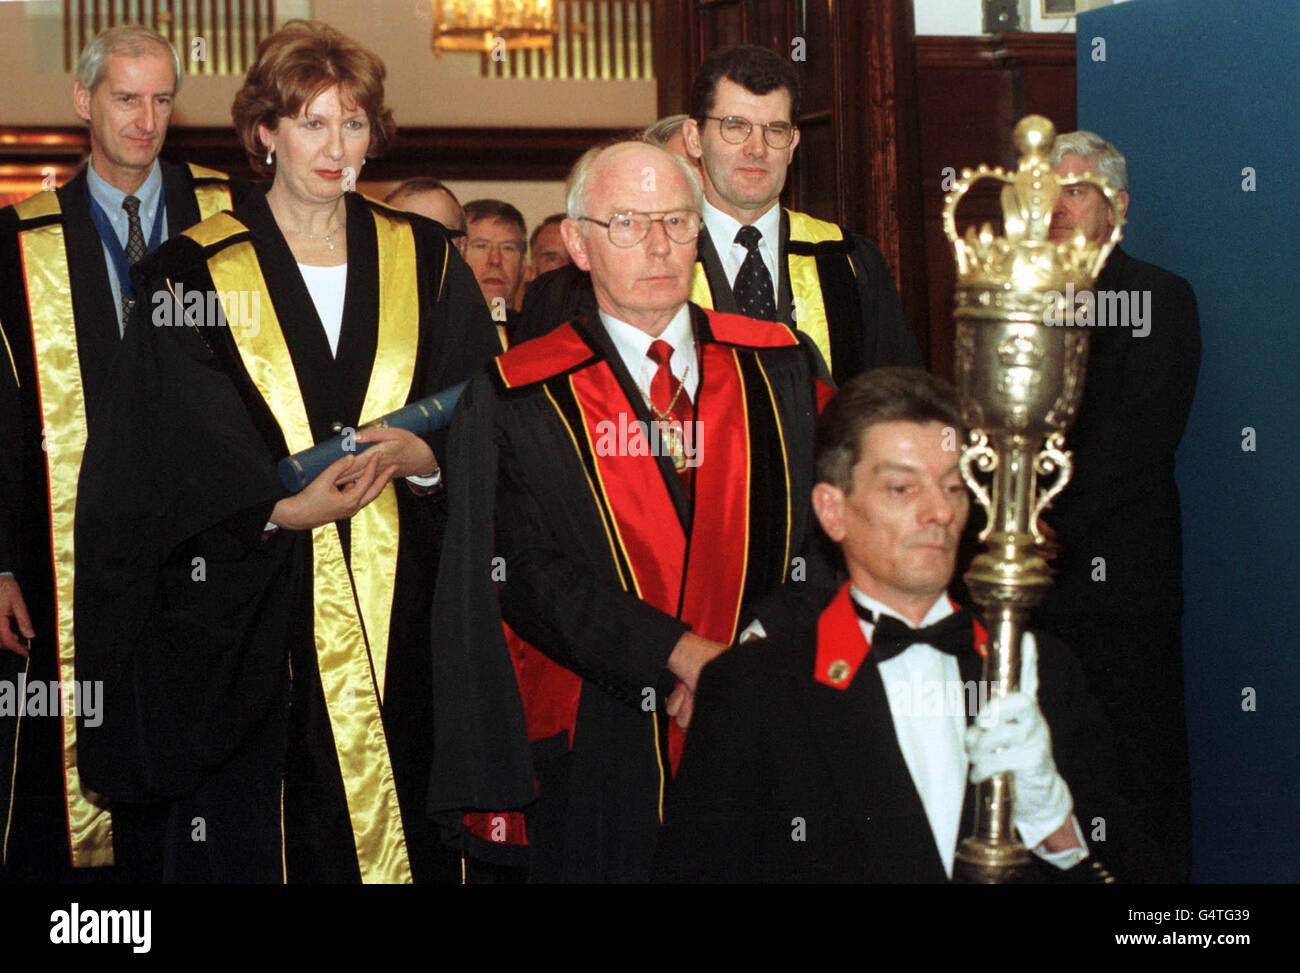 President of the Republic of Ireland, Mary McAleese (left) is escorted away by the President of the Royal College of Physicians & Surgeons of Glasgow Mr Colin MacKay (centre) after receiving an honourary fellowship of the college at a ceremony in Glasgow. Stock Photo